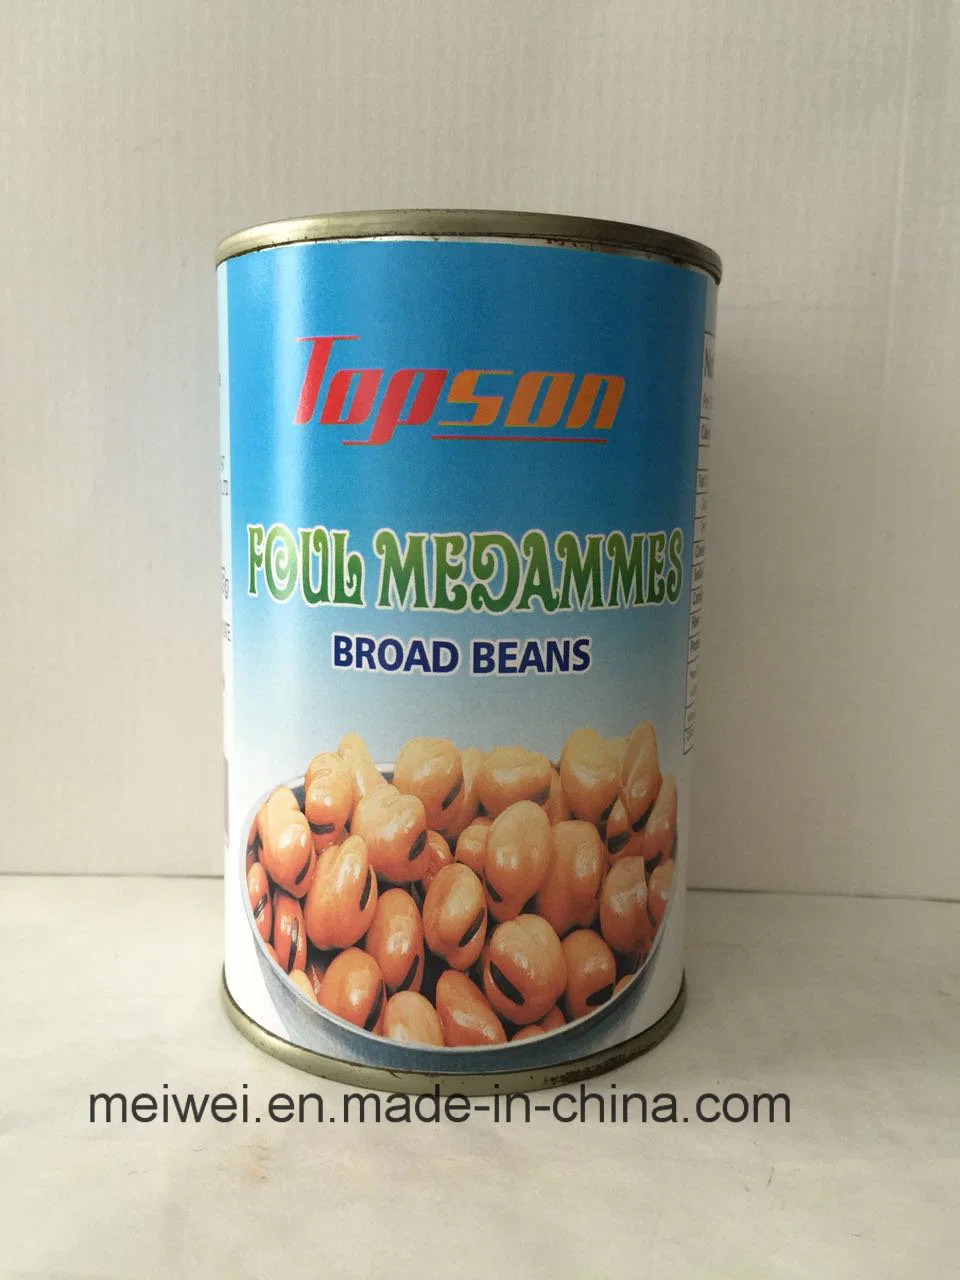 Delicious Beans Canned Broad Beans, Foul Medammes Broad Beans in Brine